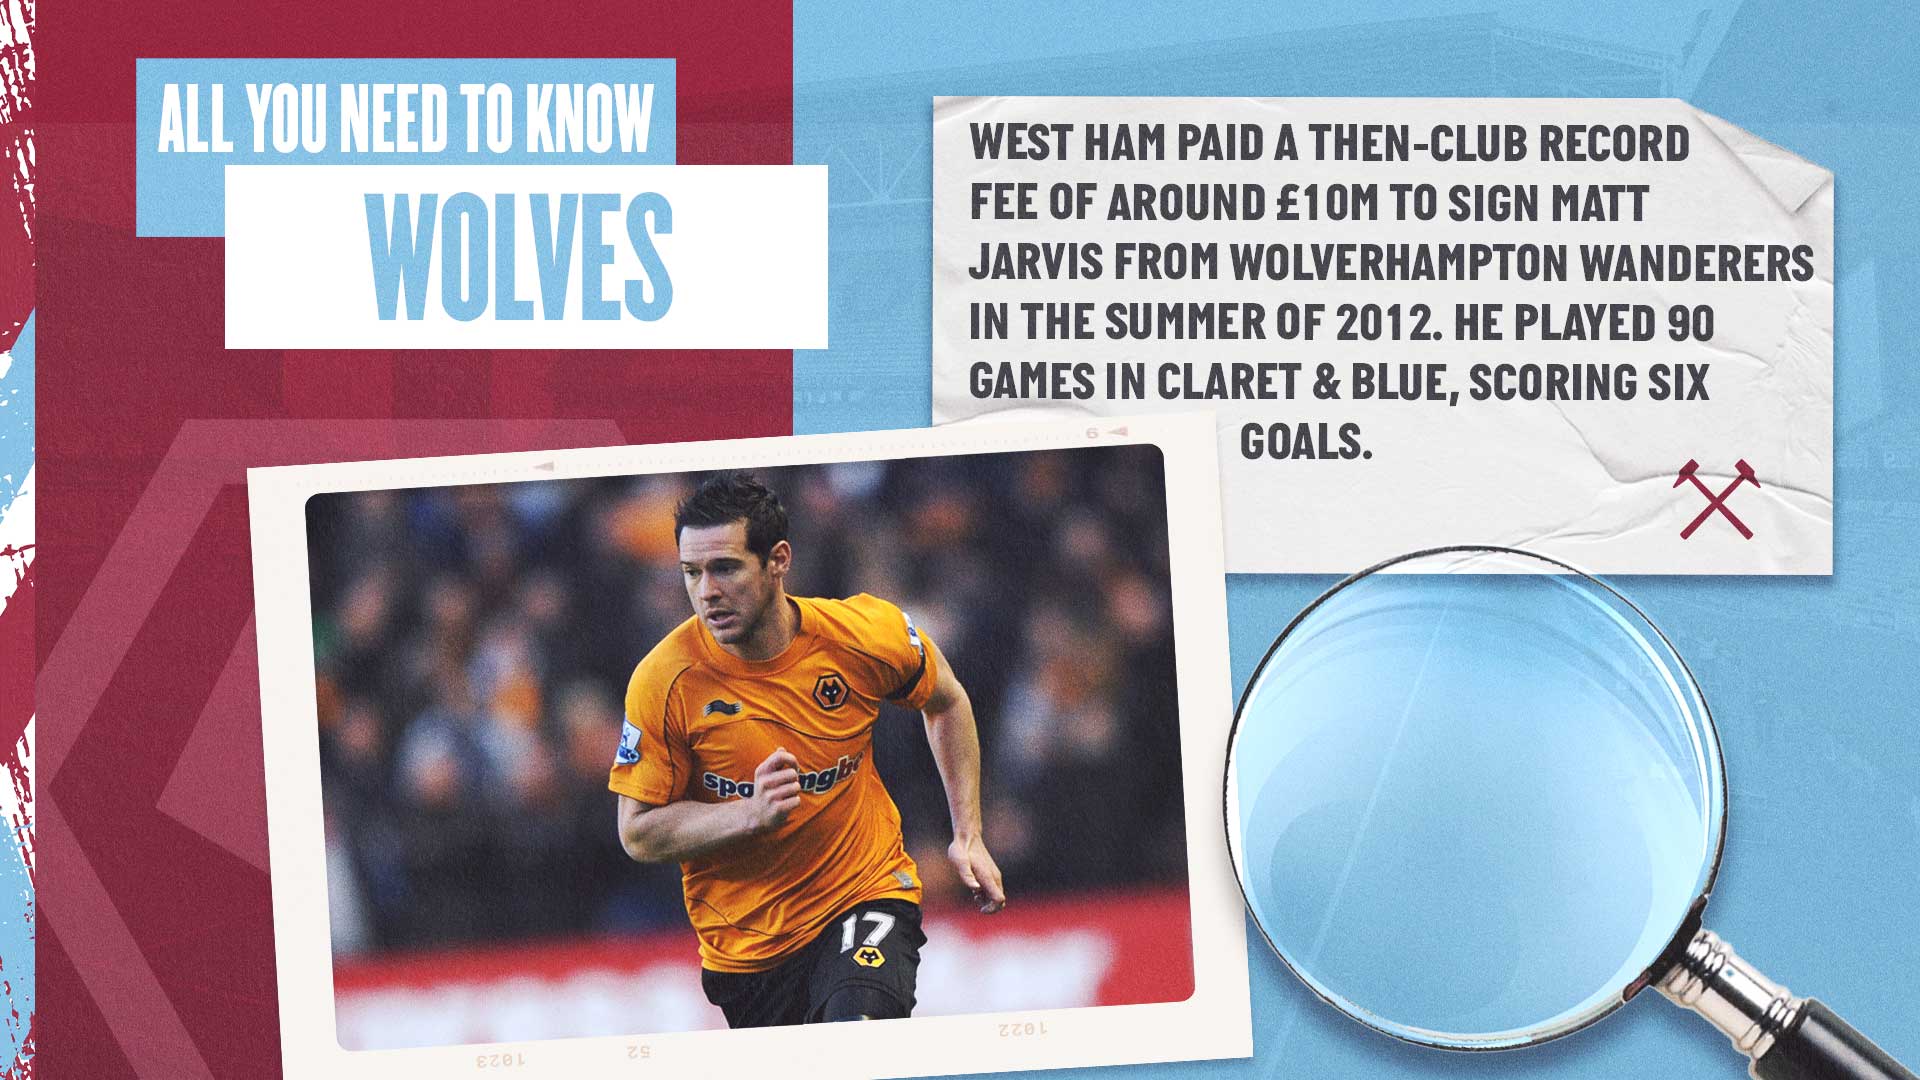 Wolves all you need to know fact 1